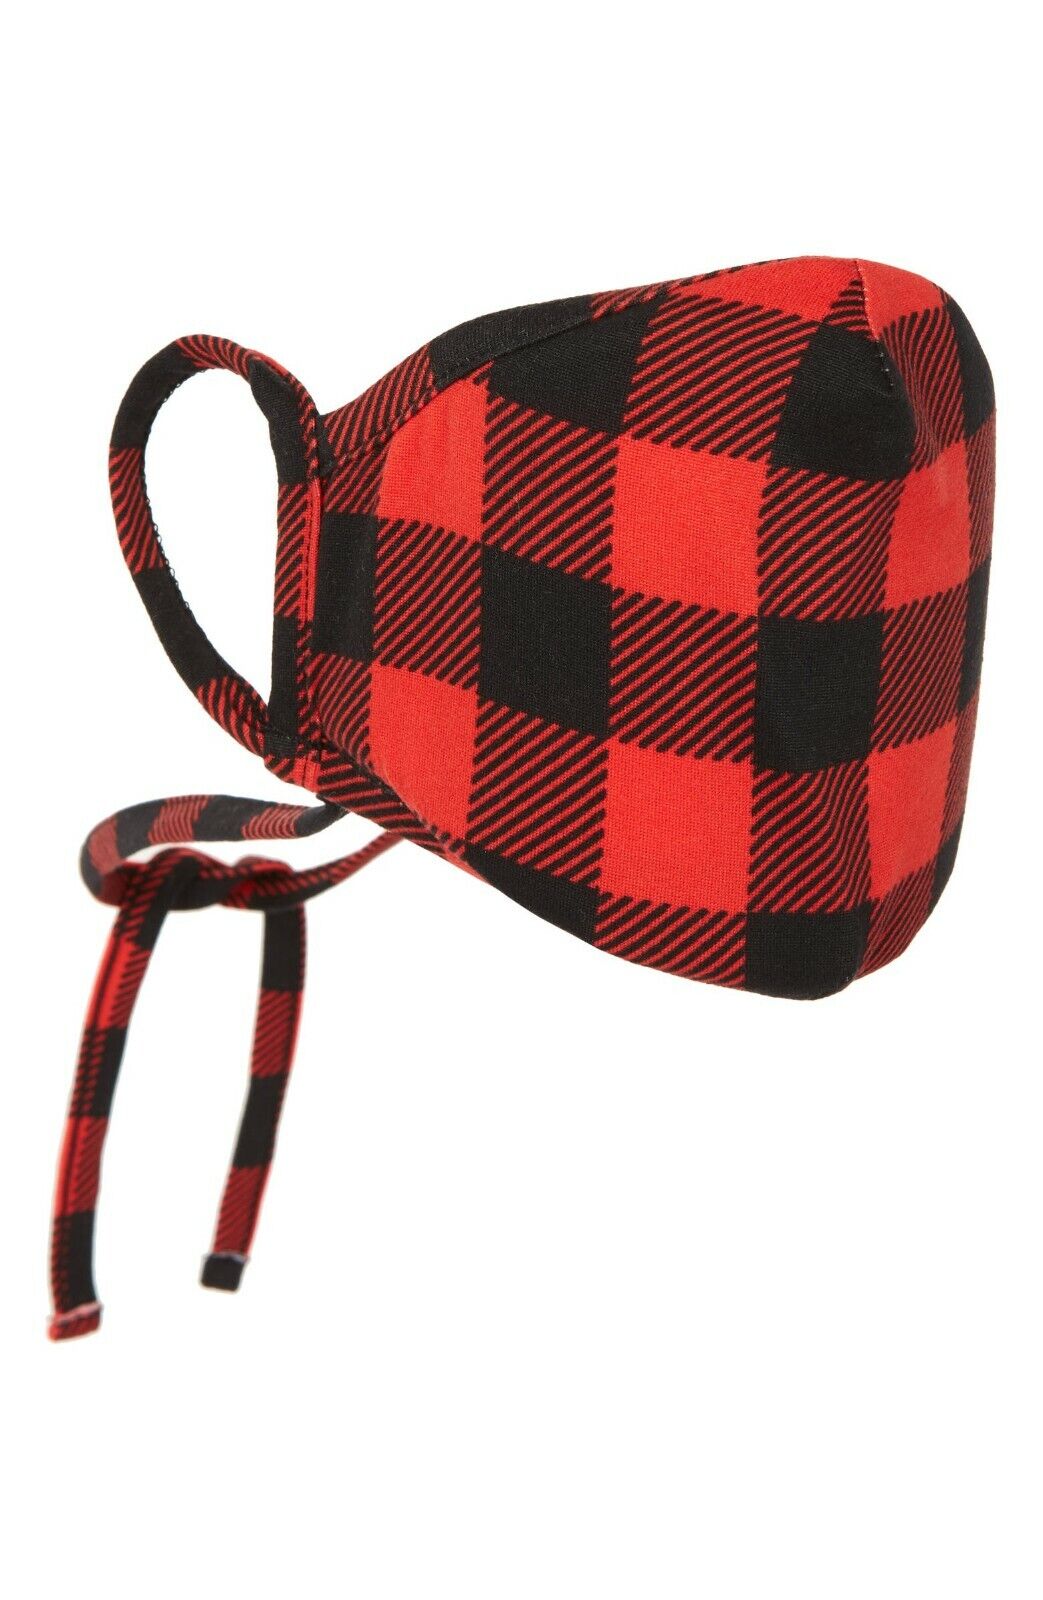 Face Mask Family 4-Pack Buffalo Check Plaid Black Red Washable Soft Cotton